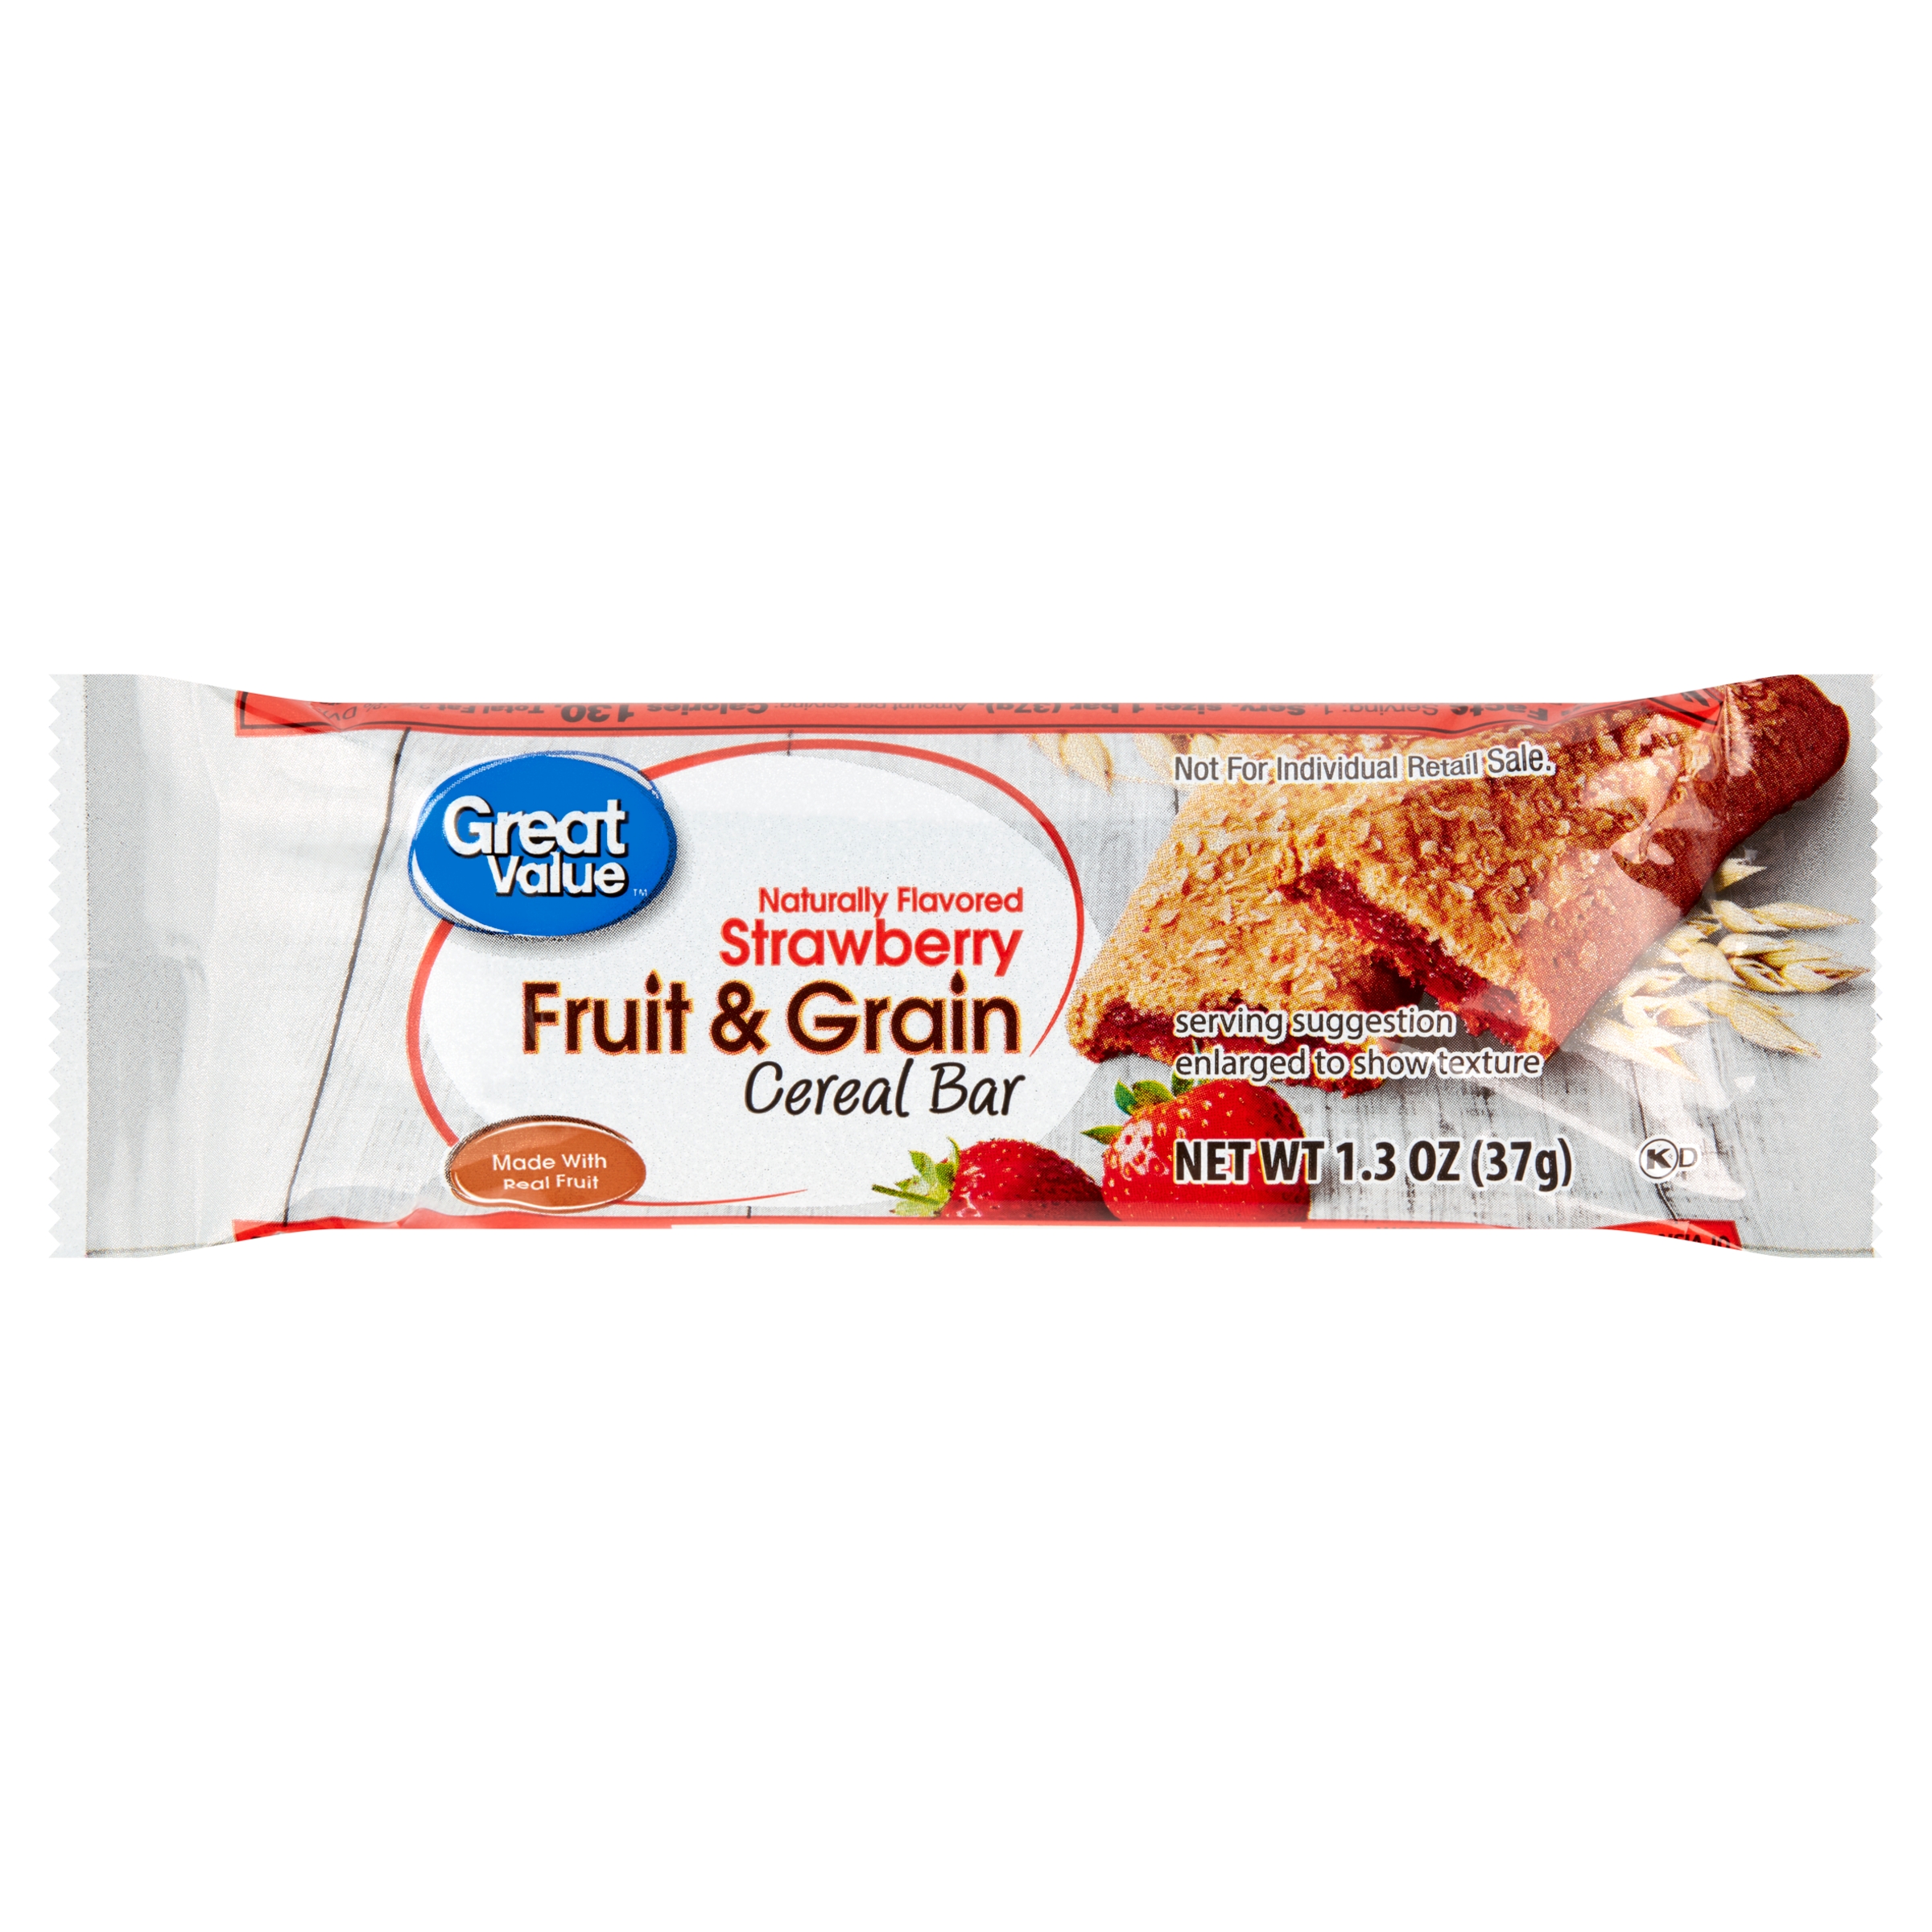 Great Value Fruit & Grain Cereal Bars, Strawberry, 1.3 oz, 8 Count - image 3 of 8